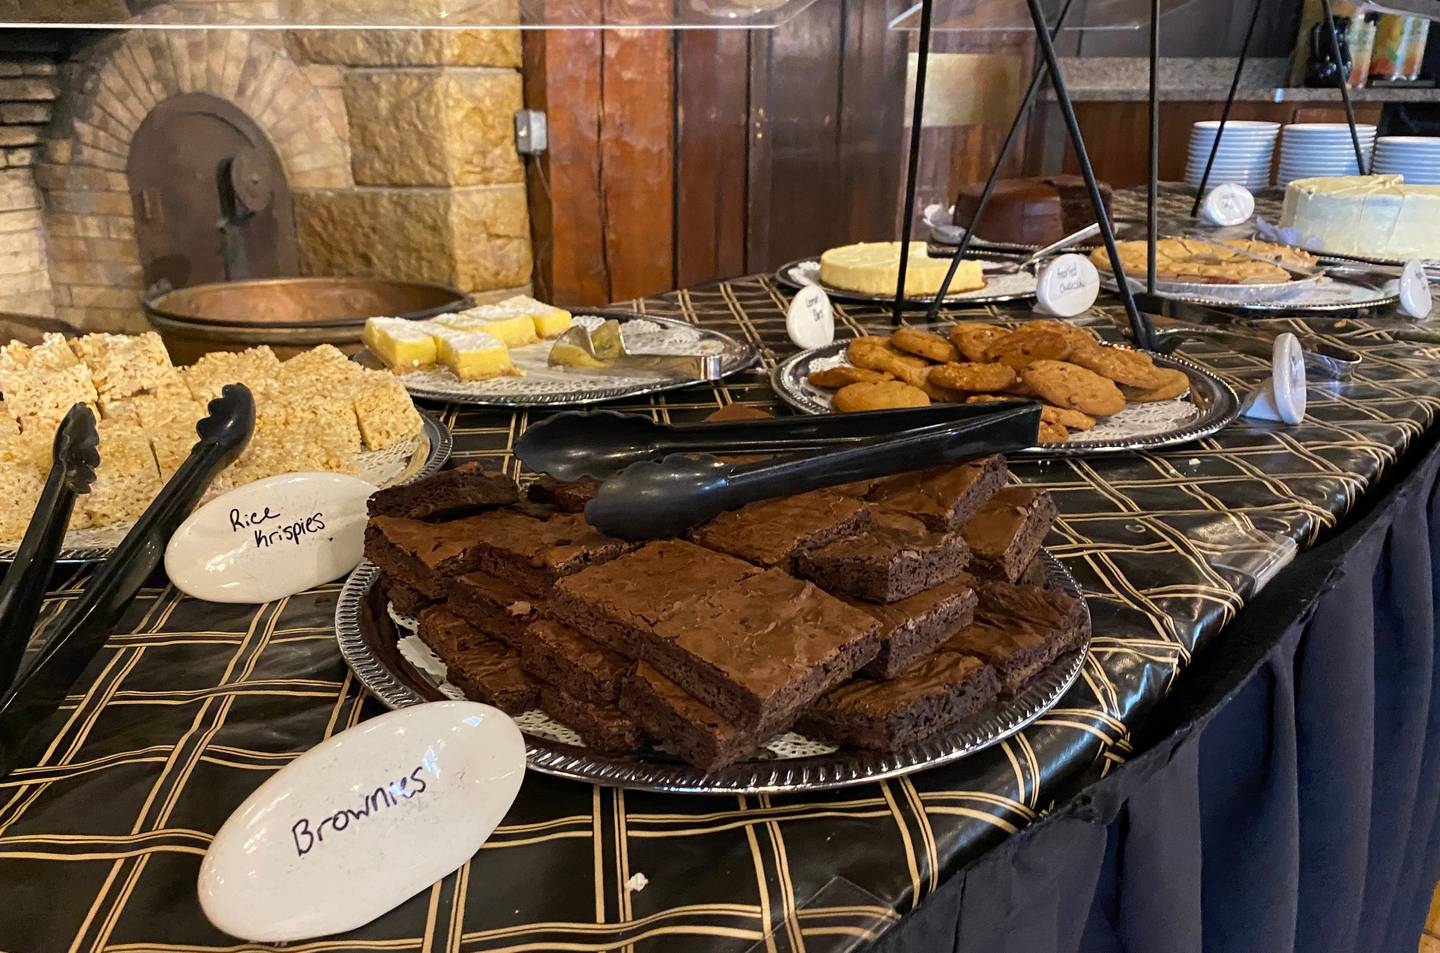 Delicious desserts are out in full force to finish a meal at the Starved Rock Lodge's Sunday brunch buffet.